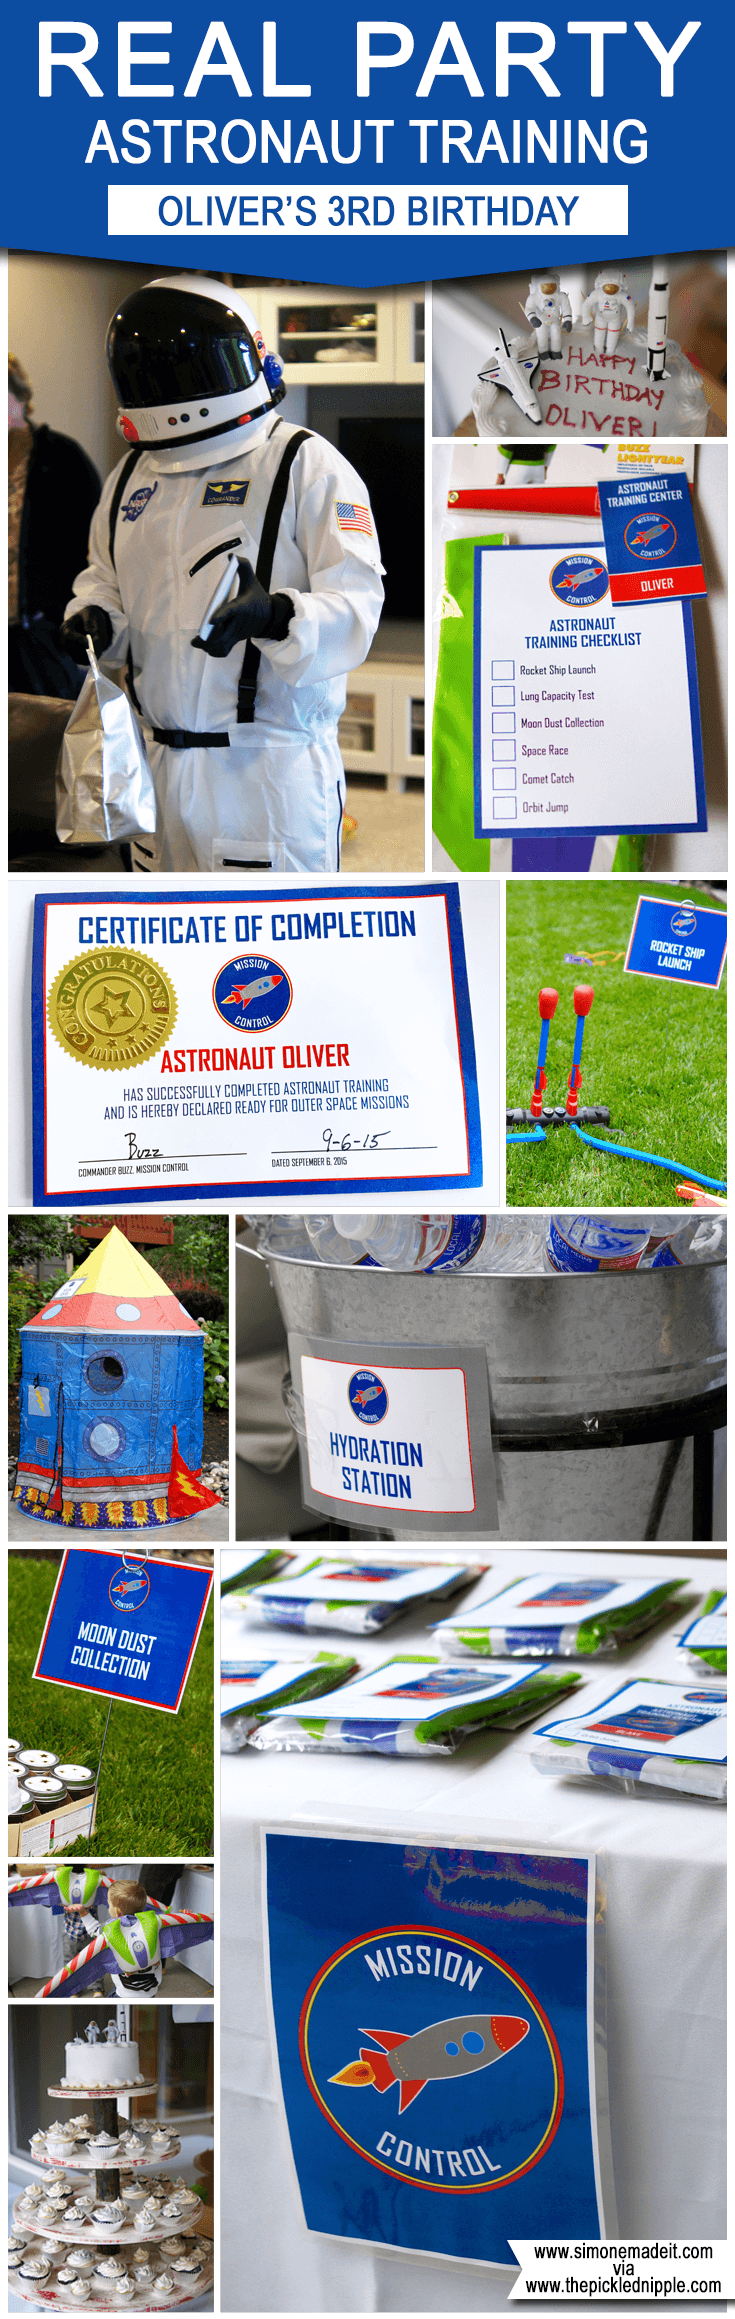 Astronaut Training Birthday Party Ideas, Games & Inspiration | Space Party Theme |  Oliver's 3rd Birthday Party